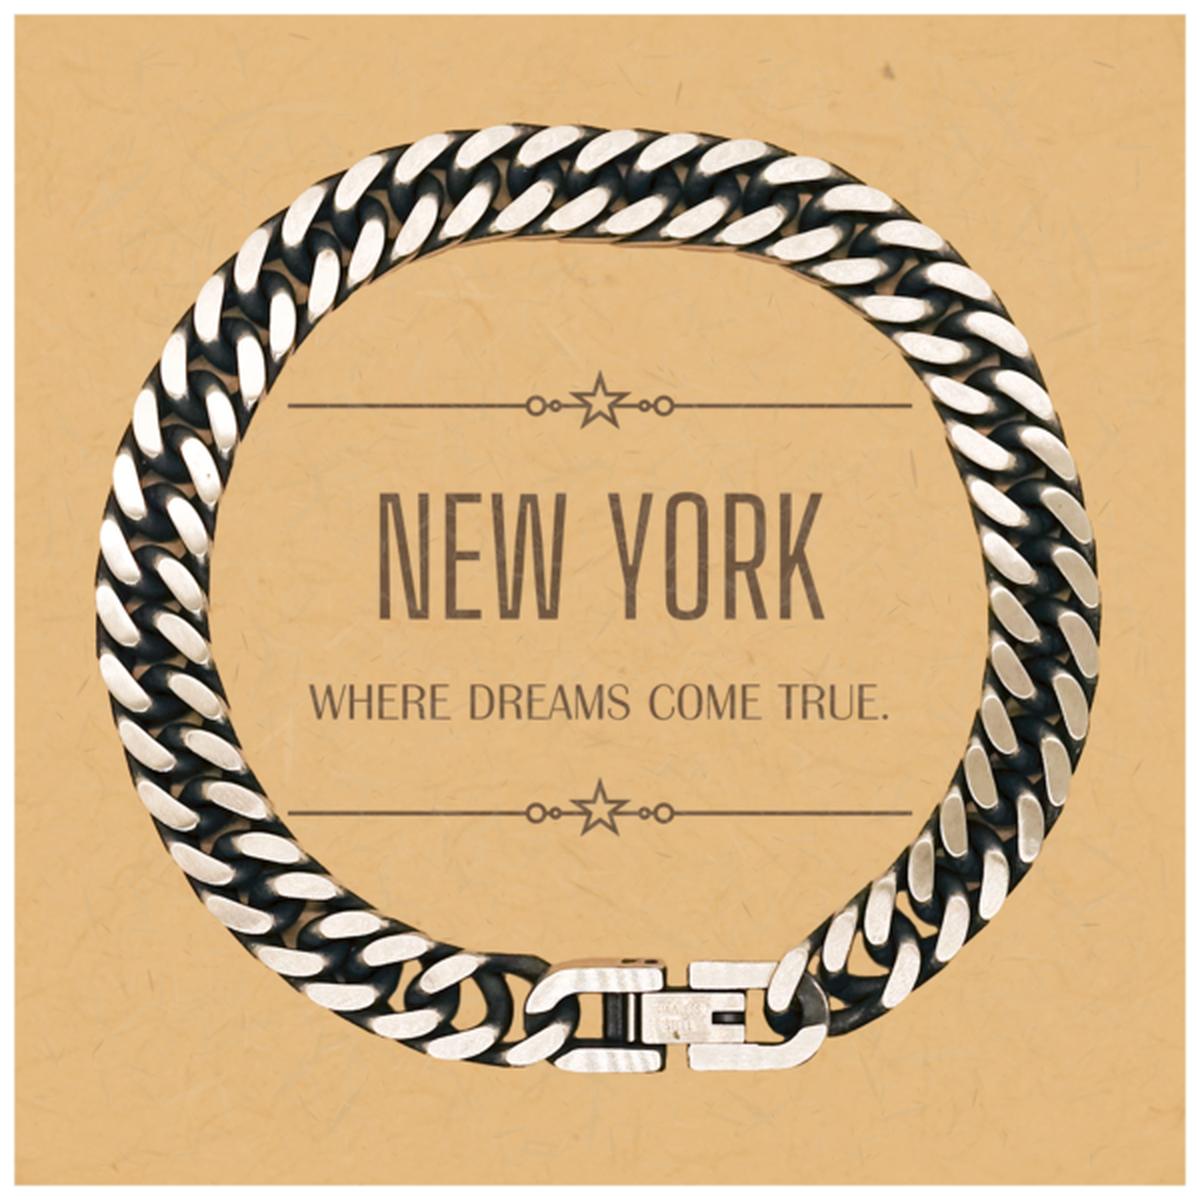 Love New York State Cuban Link Chain Bracelet, New York Where dreams come true, Birthday Christmas Inspirational Gifts For New York Men, Women, Friends